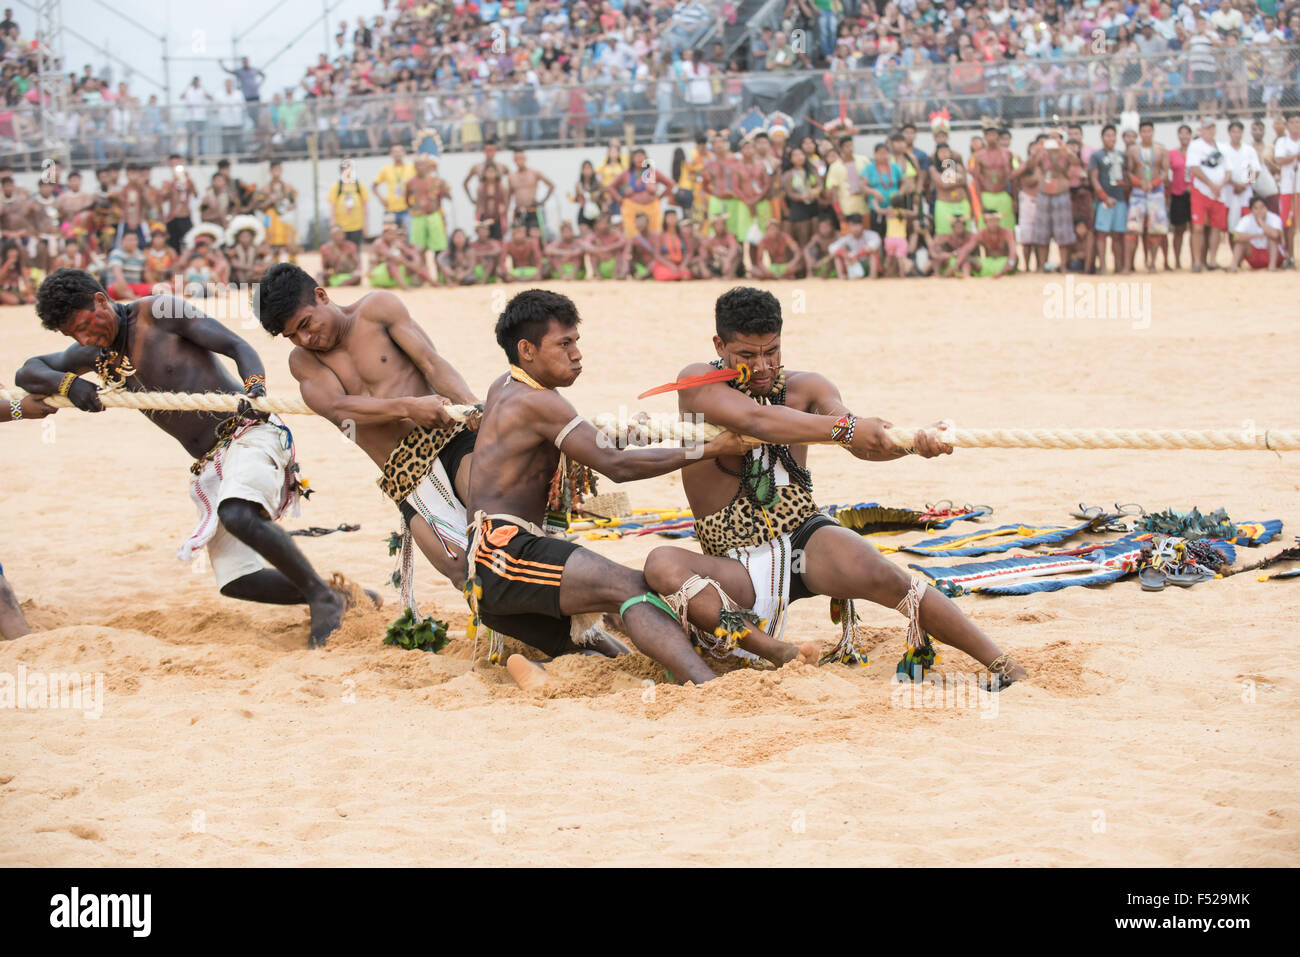 Palmas, Tocantins State, Brazil. 25th October, 2015. An indigenous tug of war team strains on the rope at the International Indigenous Games, in the city of Palmas, Tocantins State, Brazil. Credit:  Sue Cunningham Photographic/Alamy Live News Stock Photo